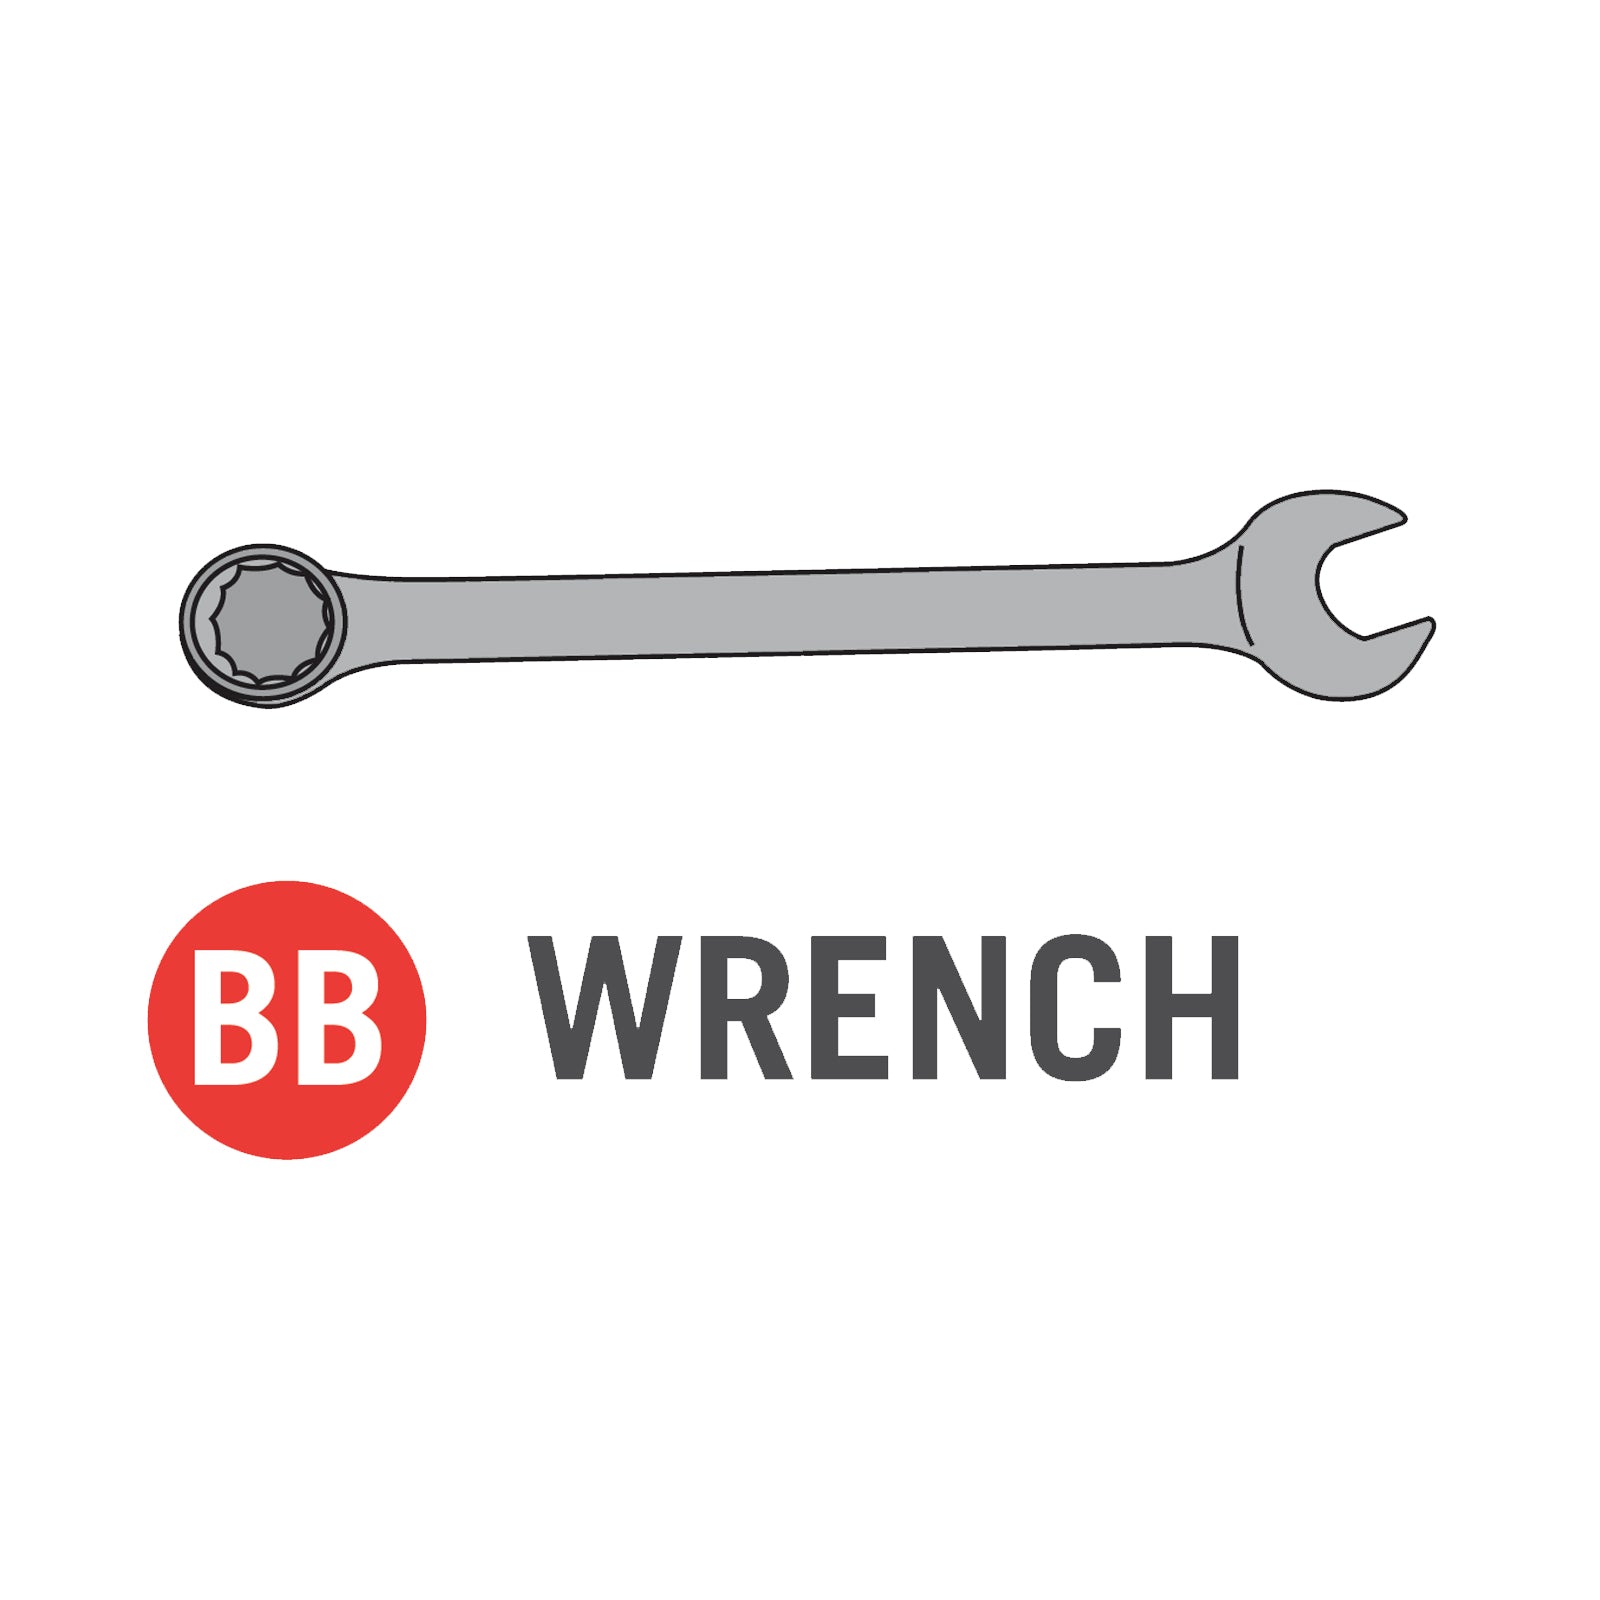 Wrench for 11x18 foot Horizon Trampoline (Part BB).